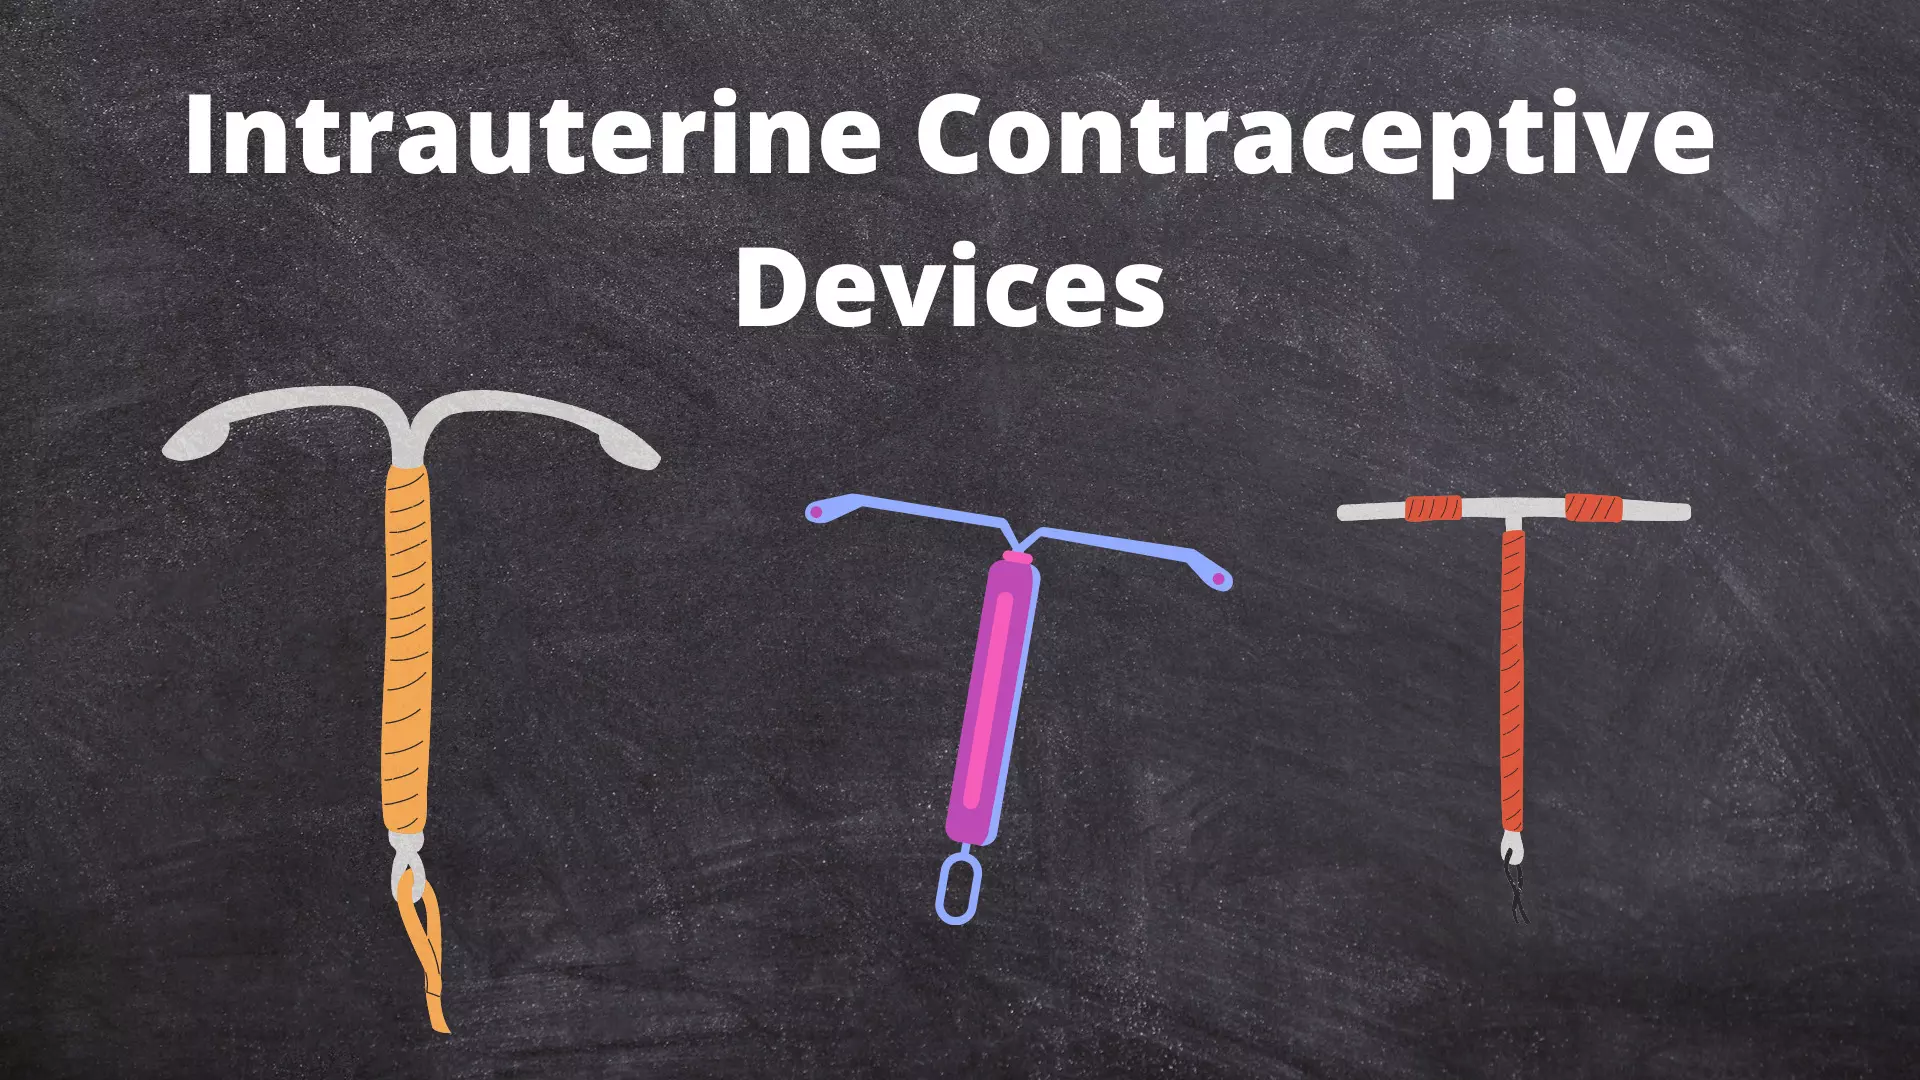 IUDs use has no impact on the ability to conceive: AJOG study